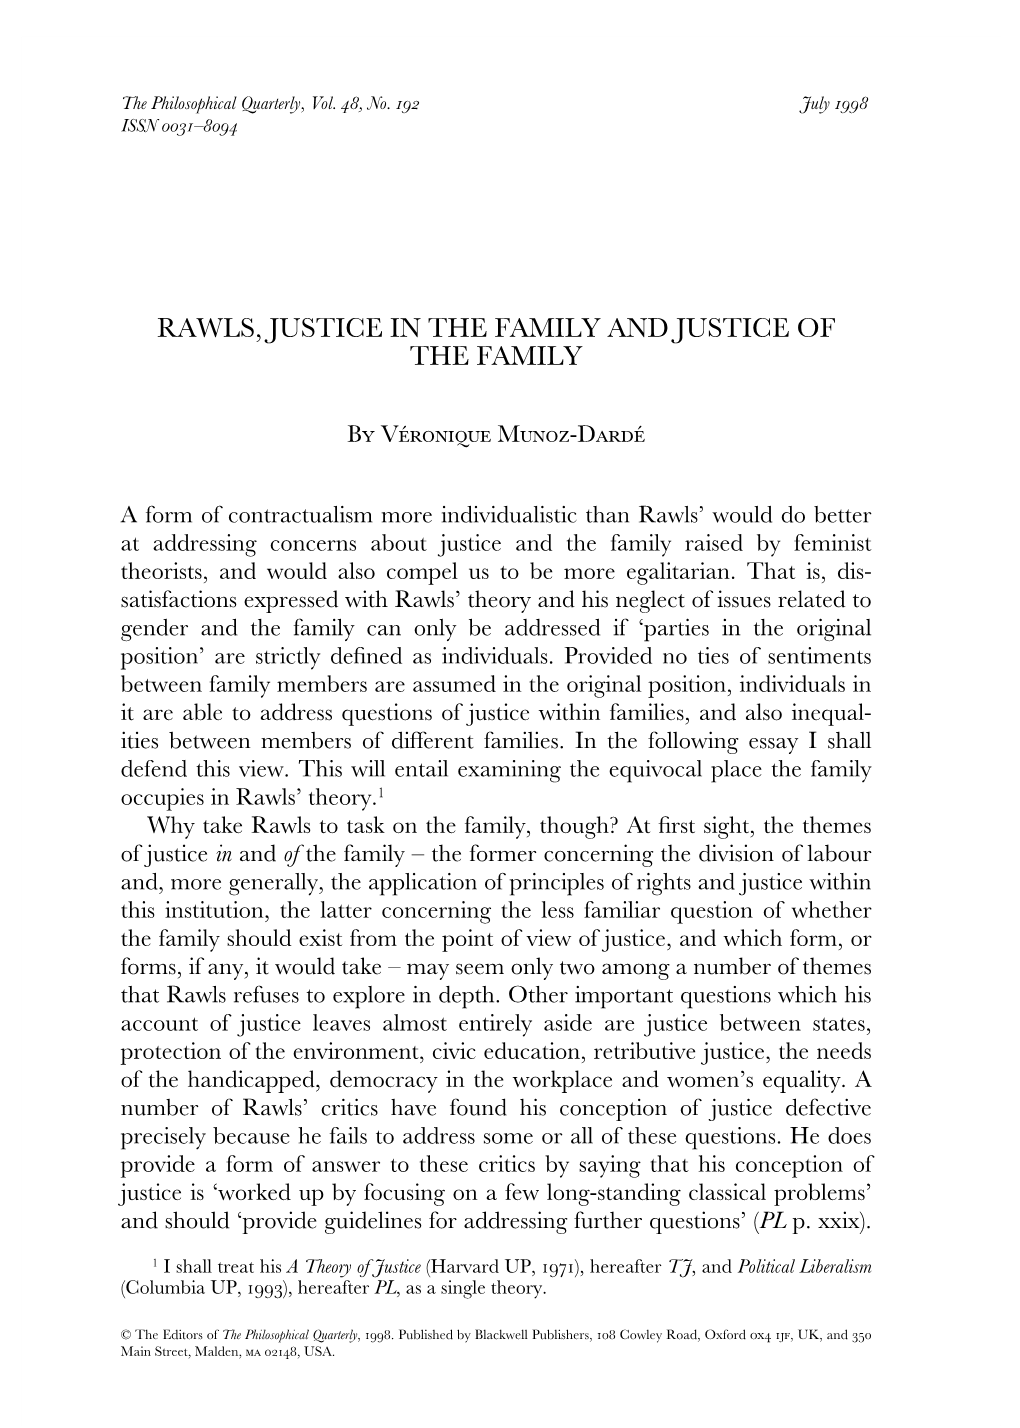 Rawls, Justice in the Family and Justice of the Family